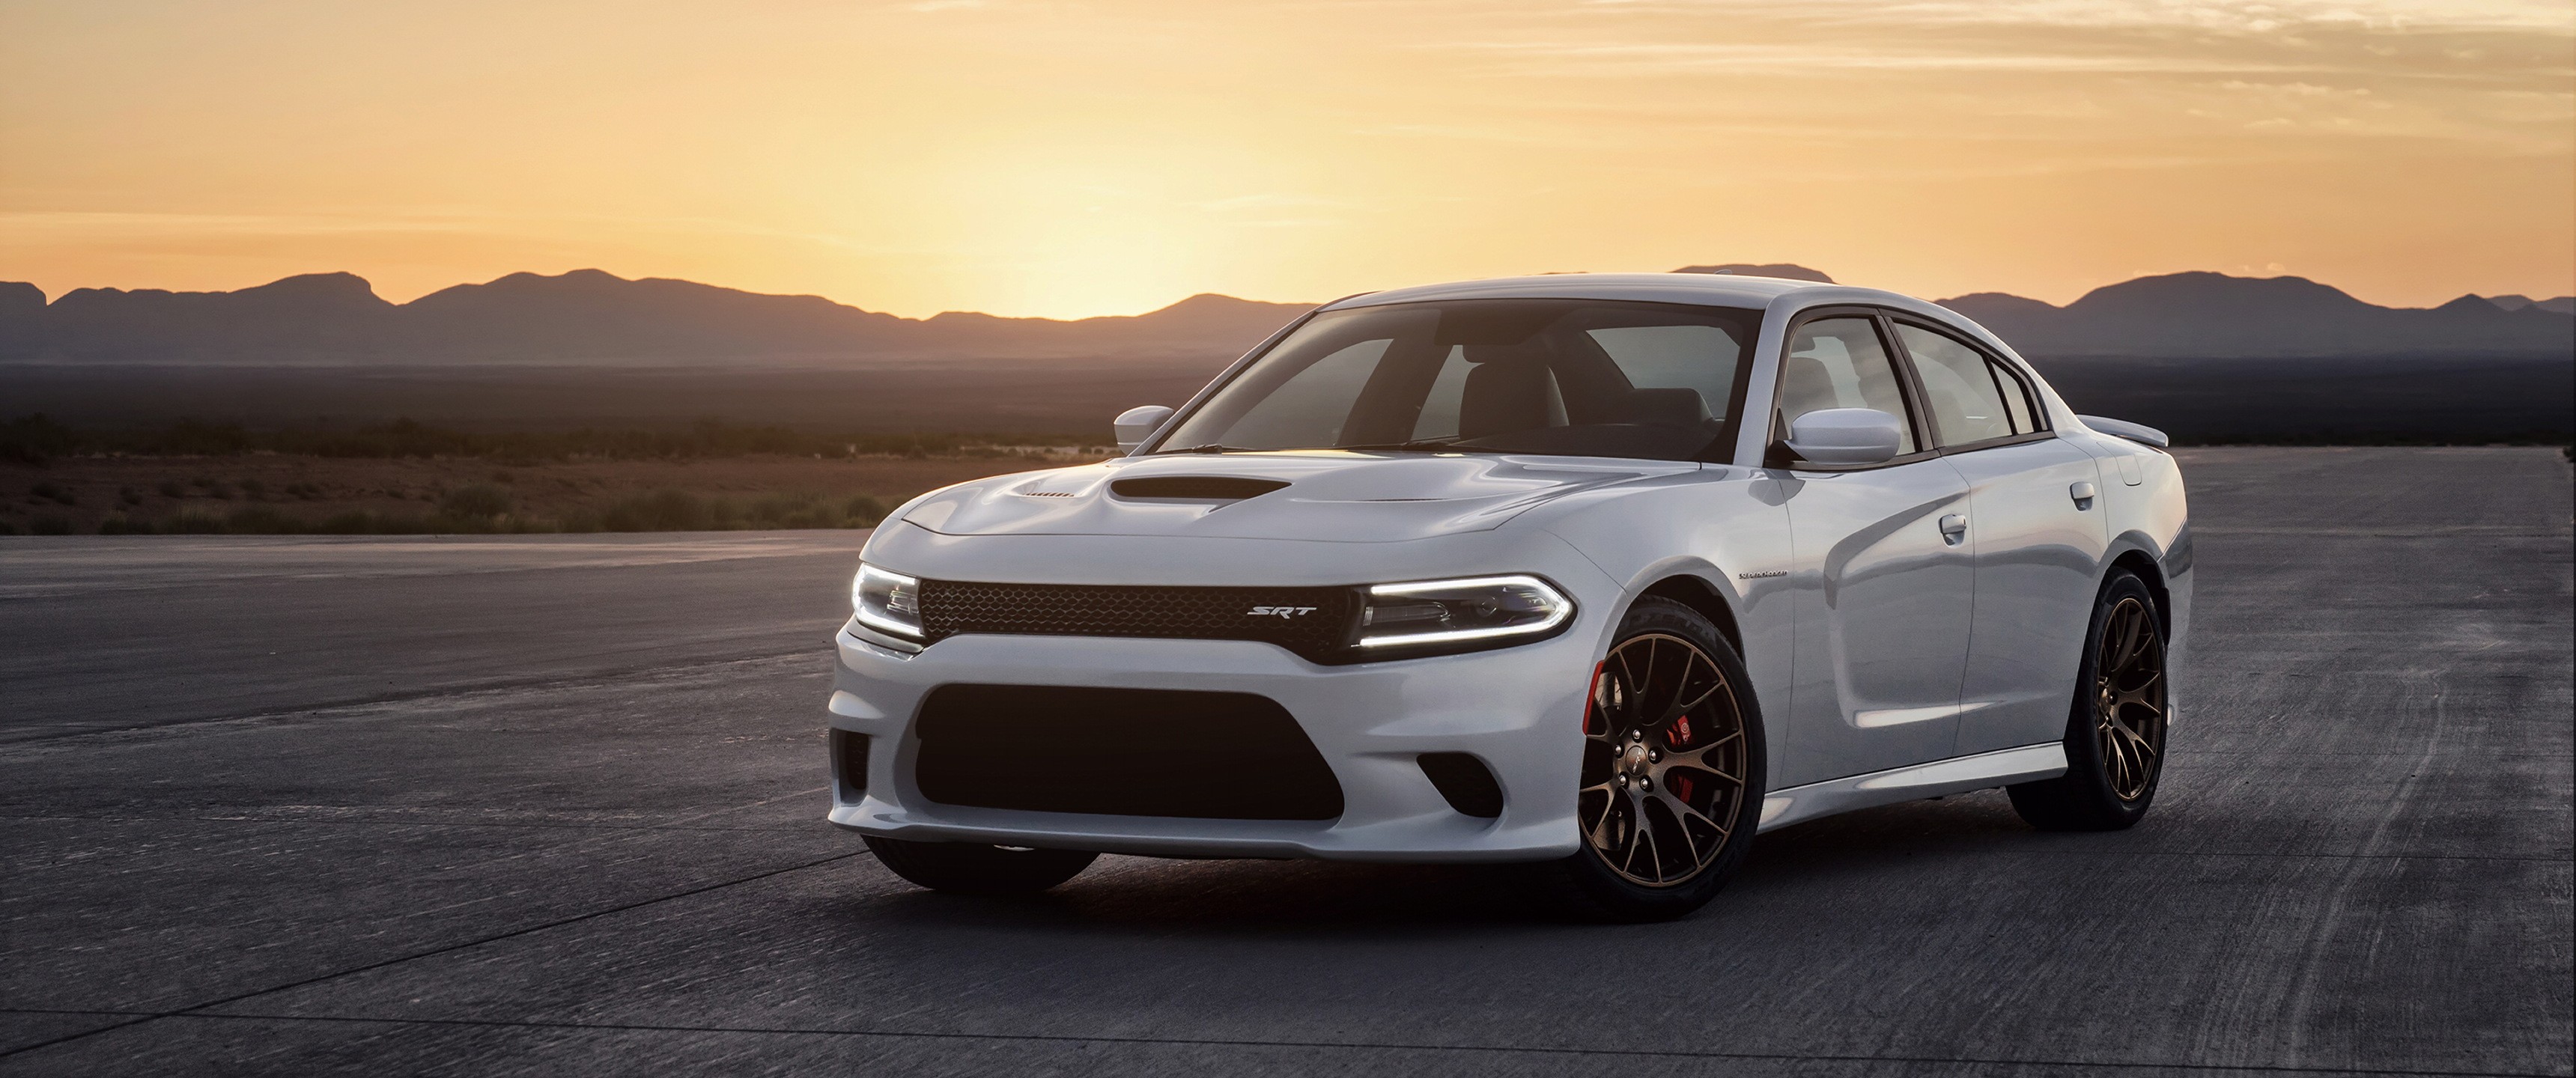 Dodge Charger Hellcat, HD Cars, 4k Wallpapers, Images, Backgrounds